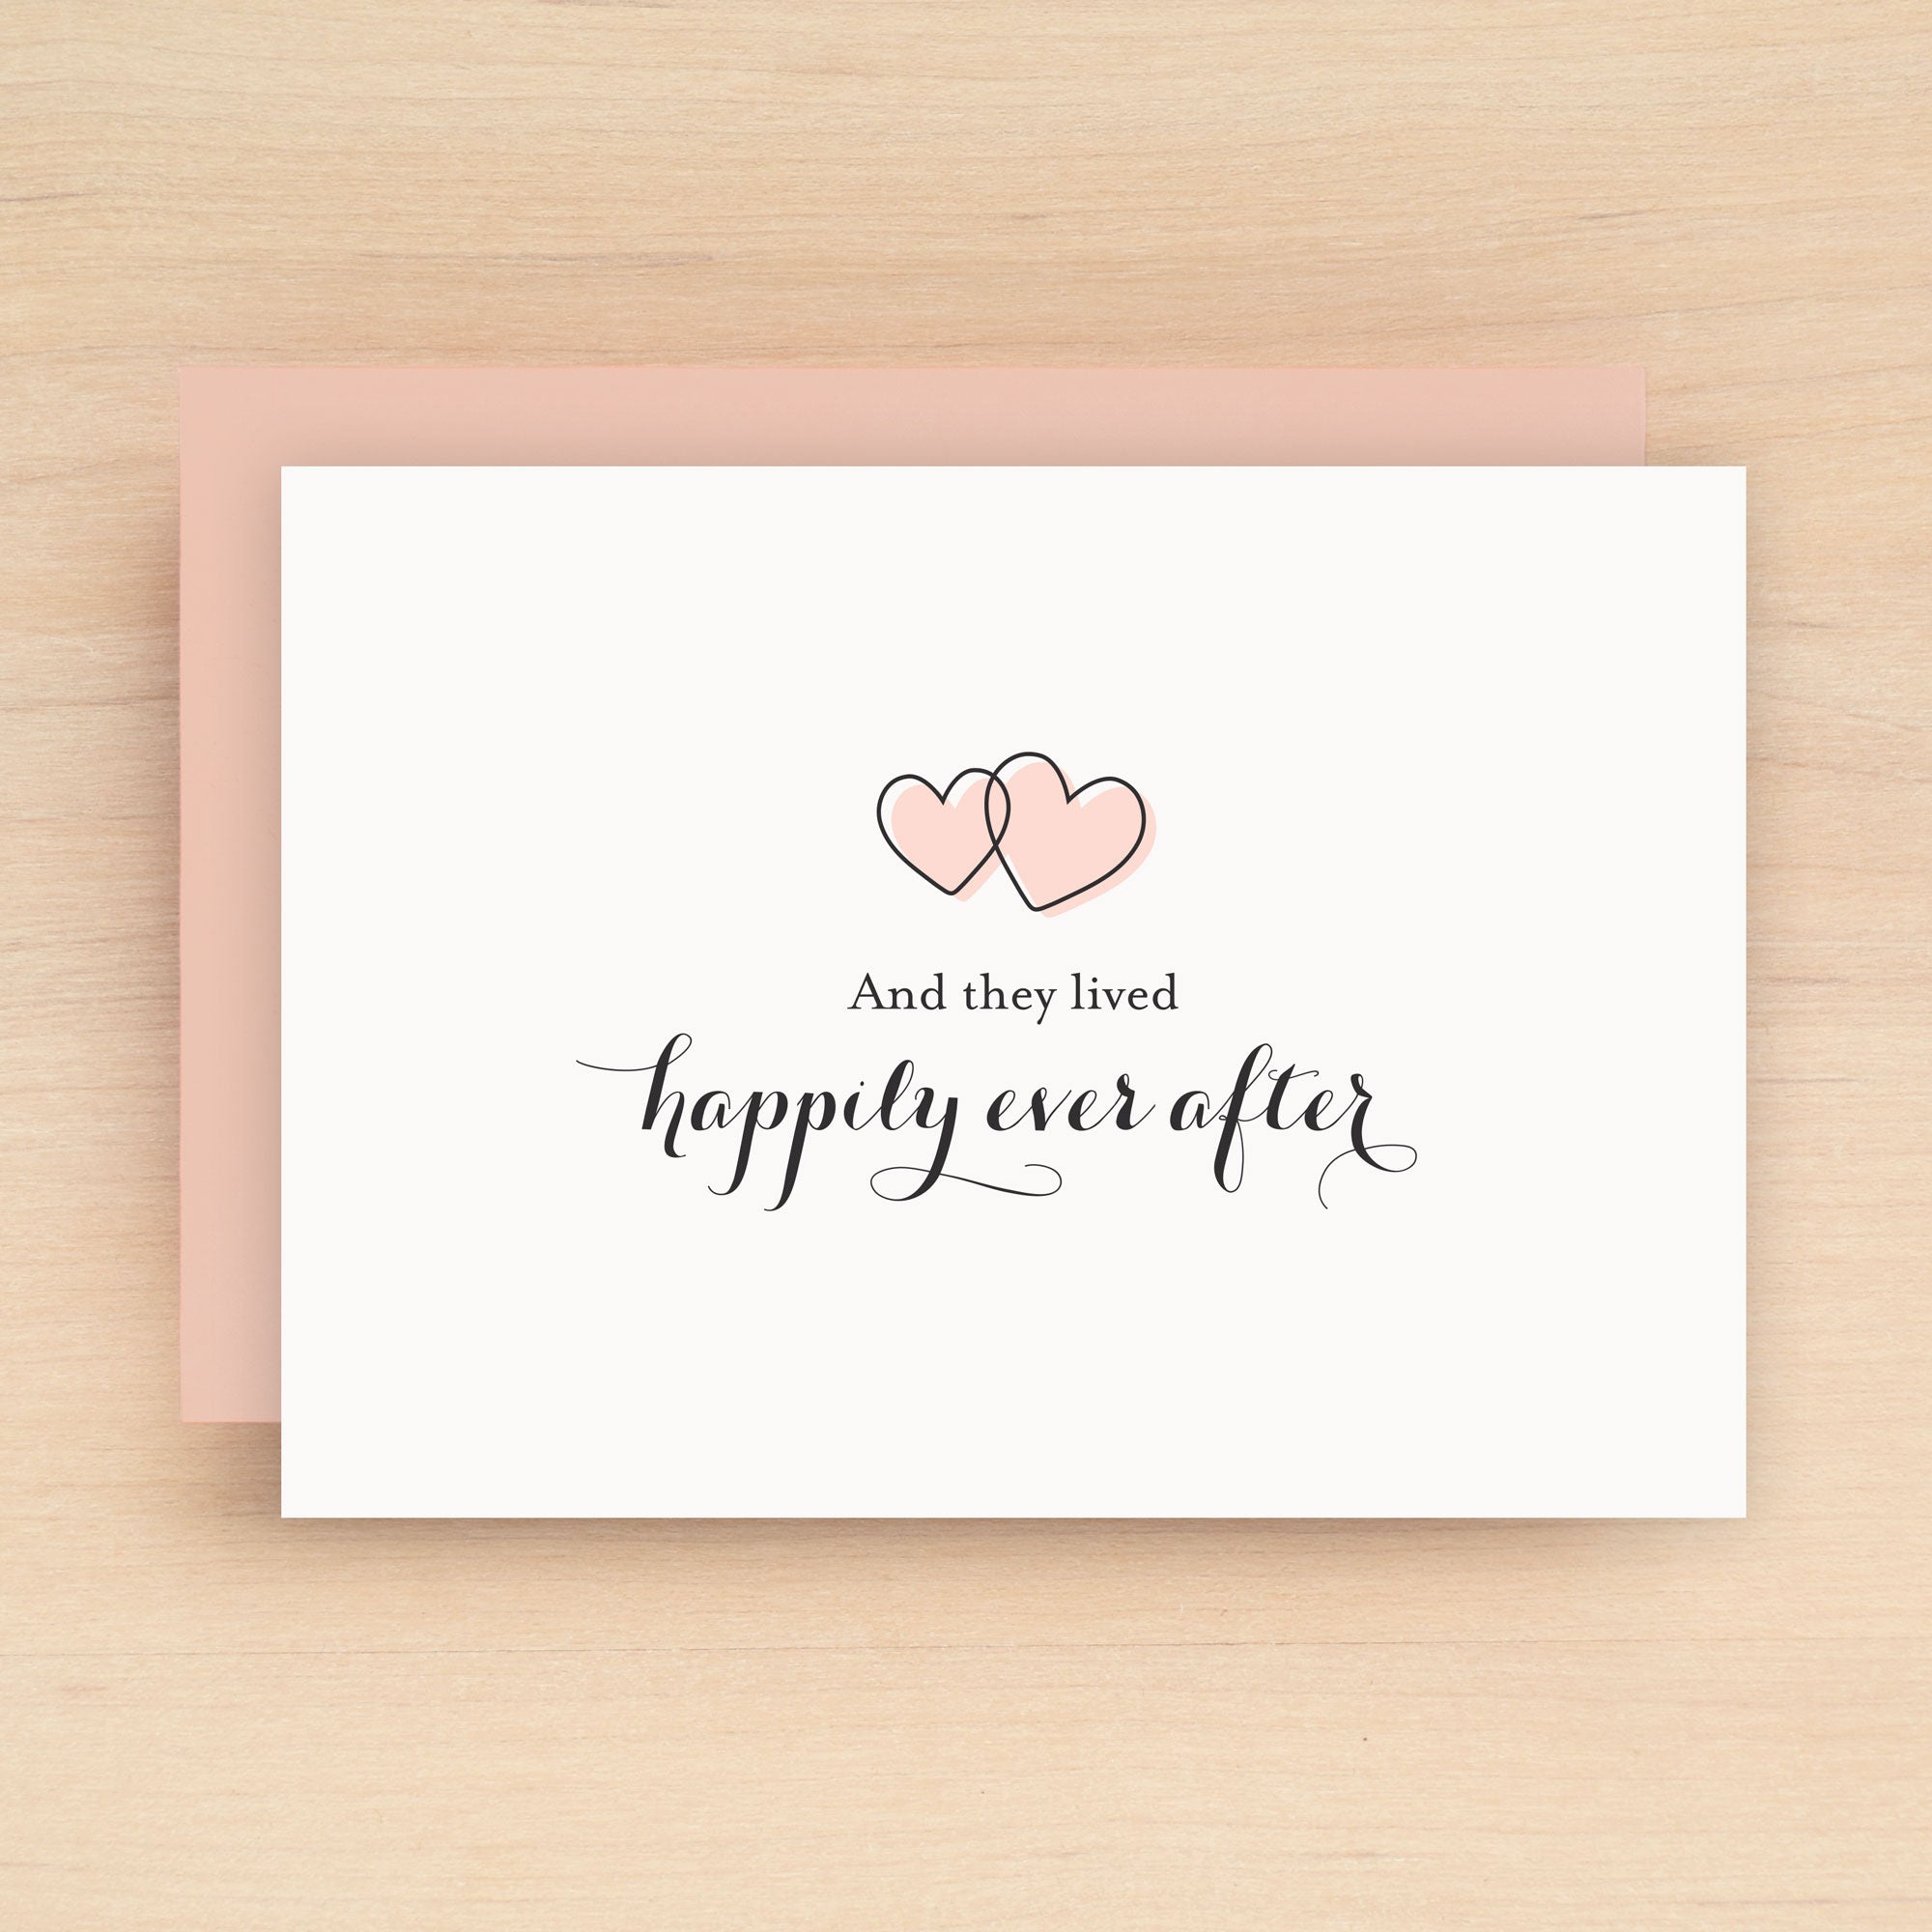 "And they lived happily ever after" Happily Greeting Card #265